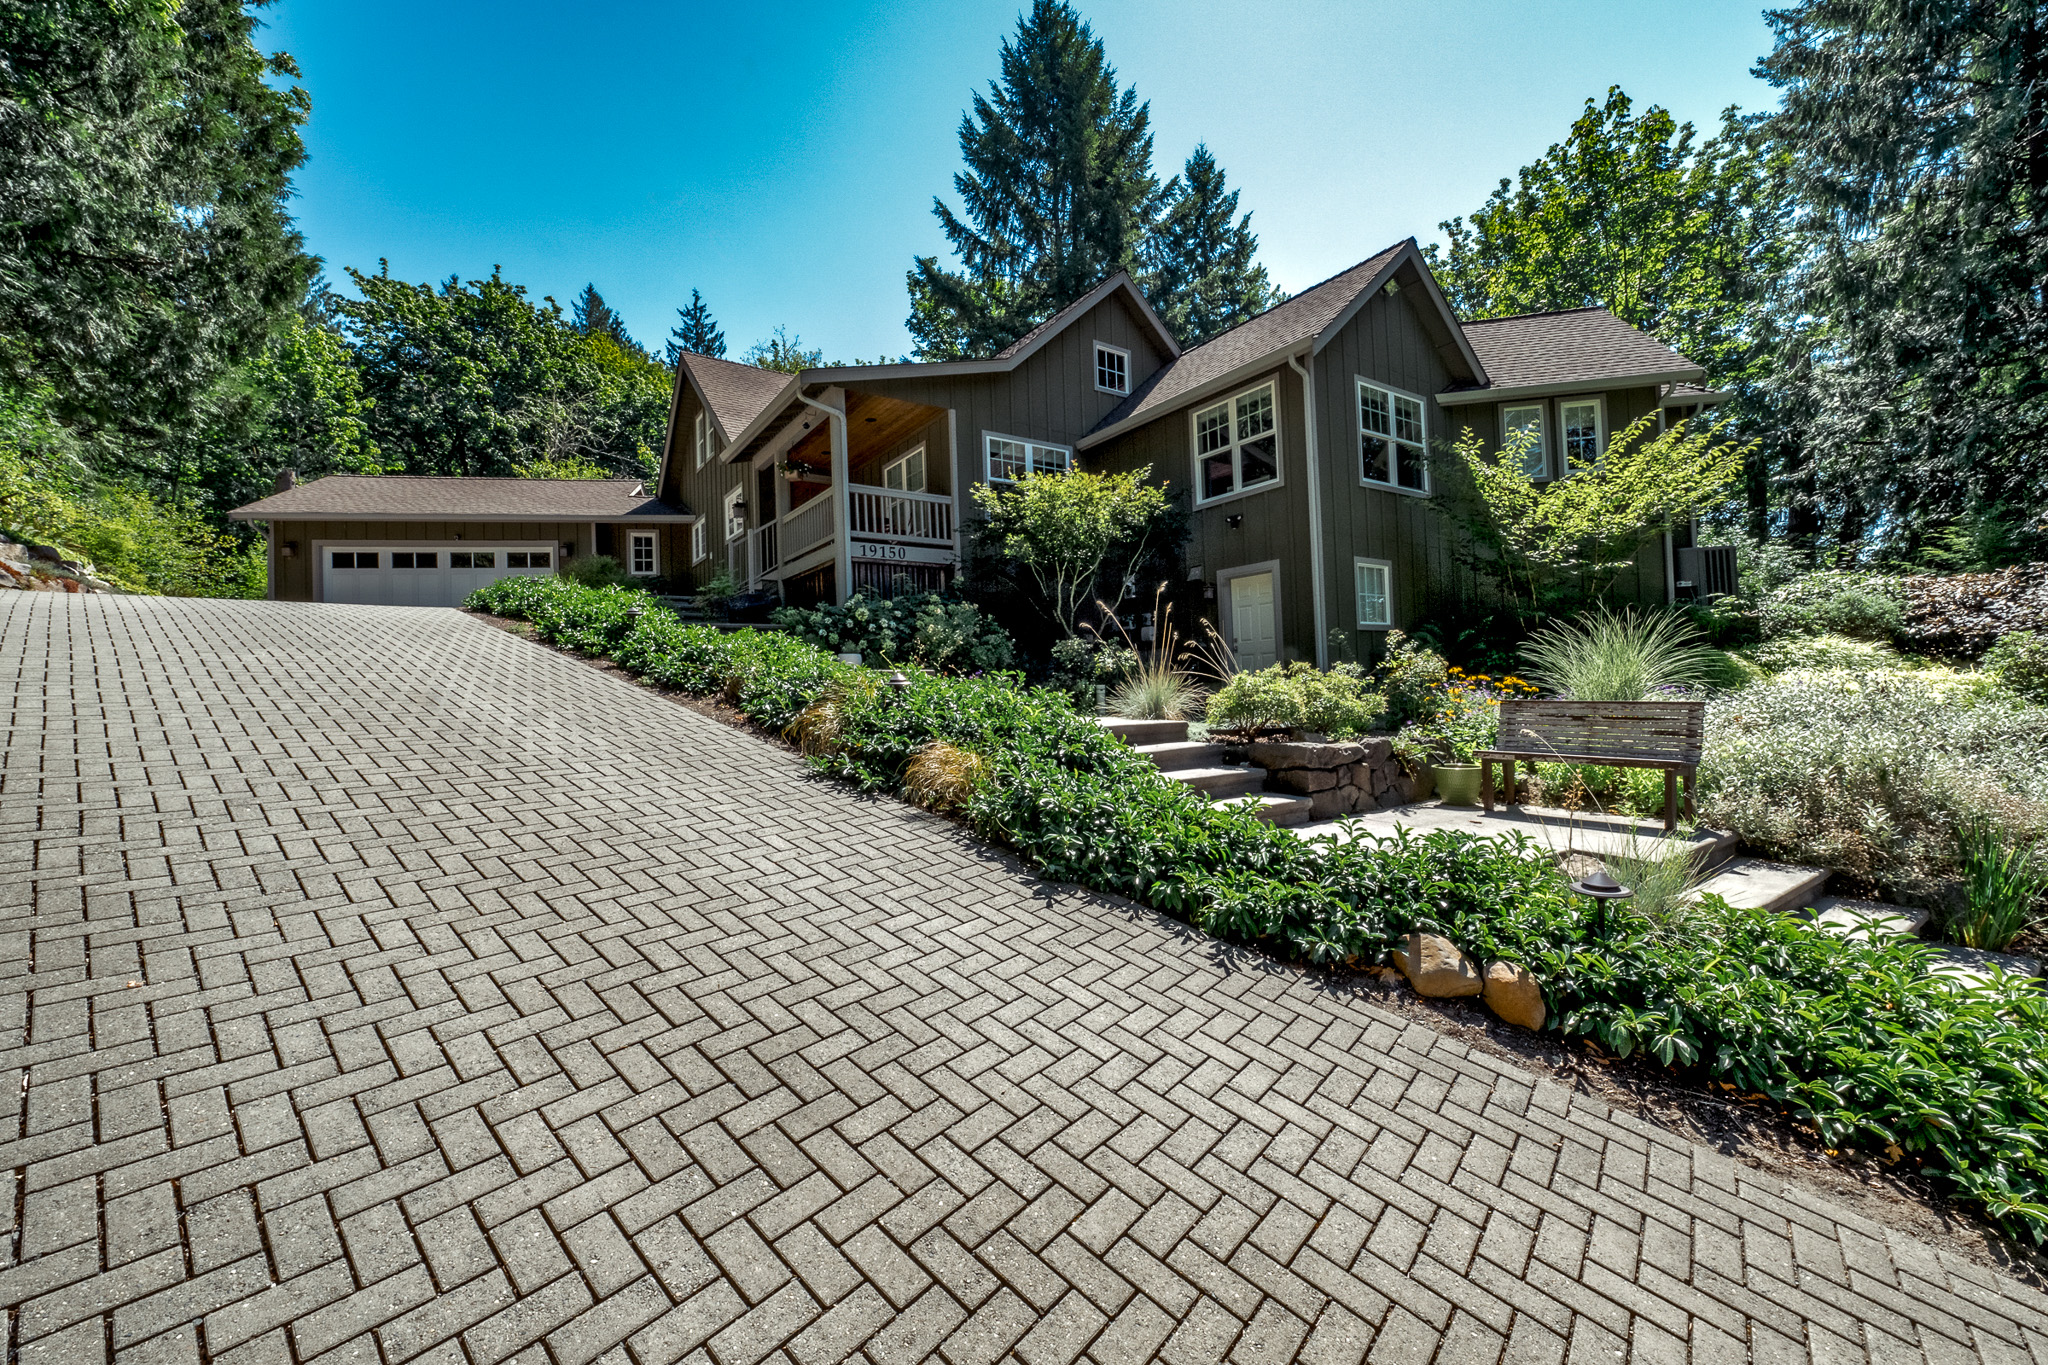 Sloped permeable paver driveway leads up to home